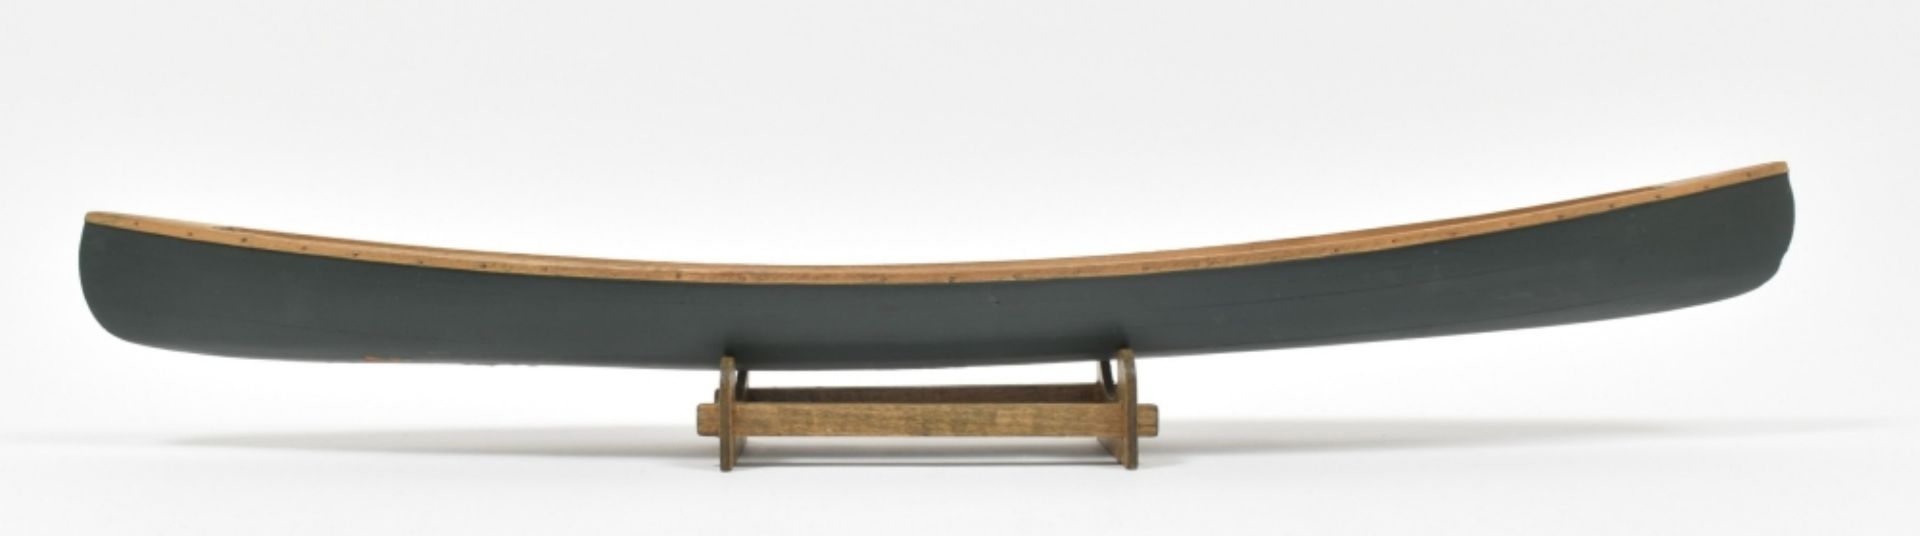 Historic model of a canoe - Image 6 of 9